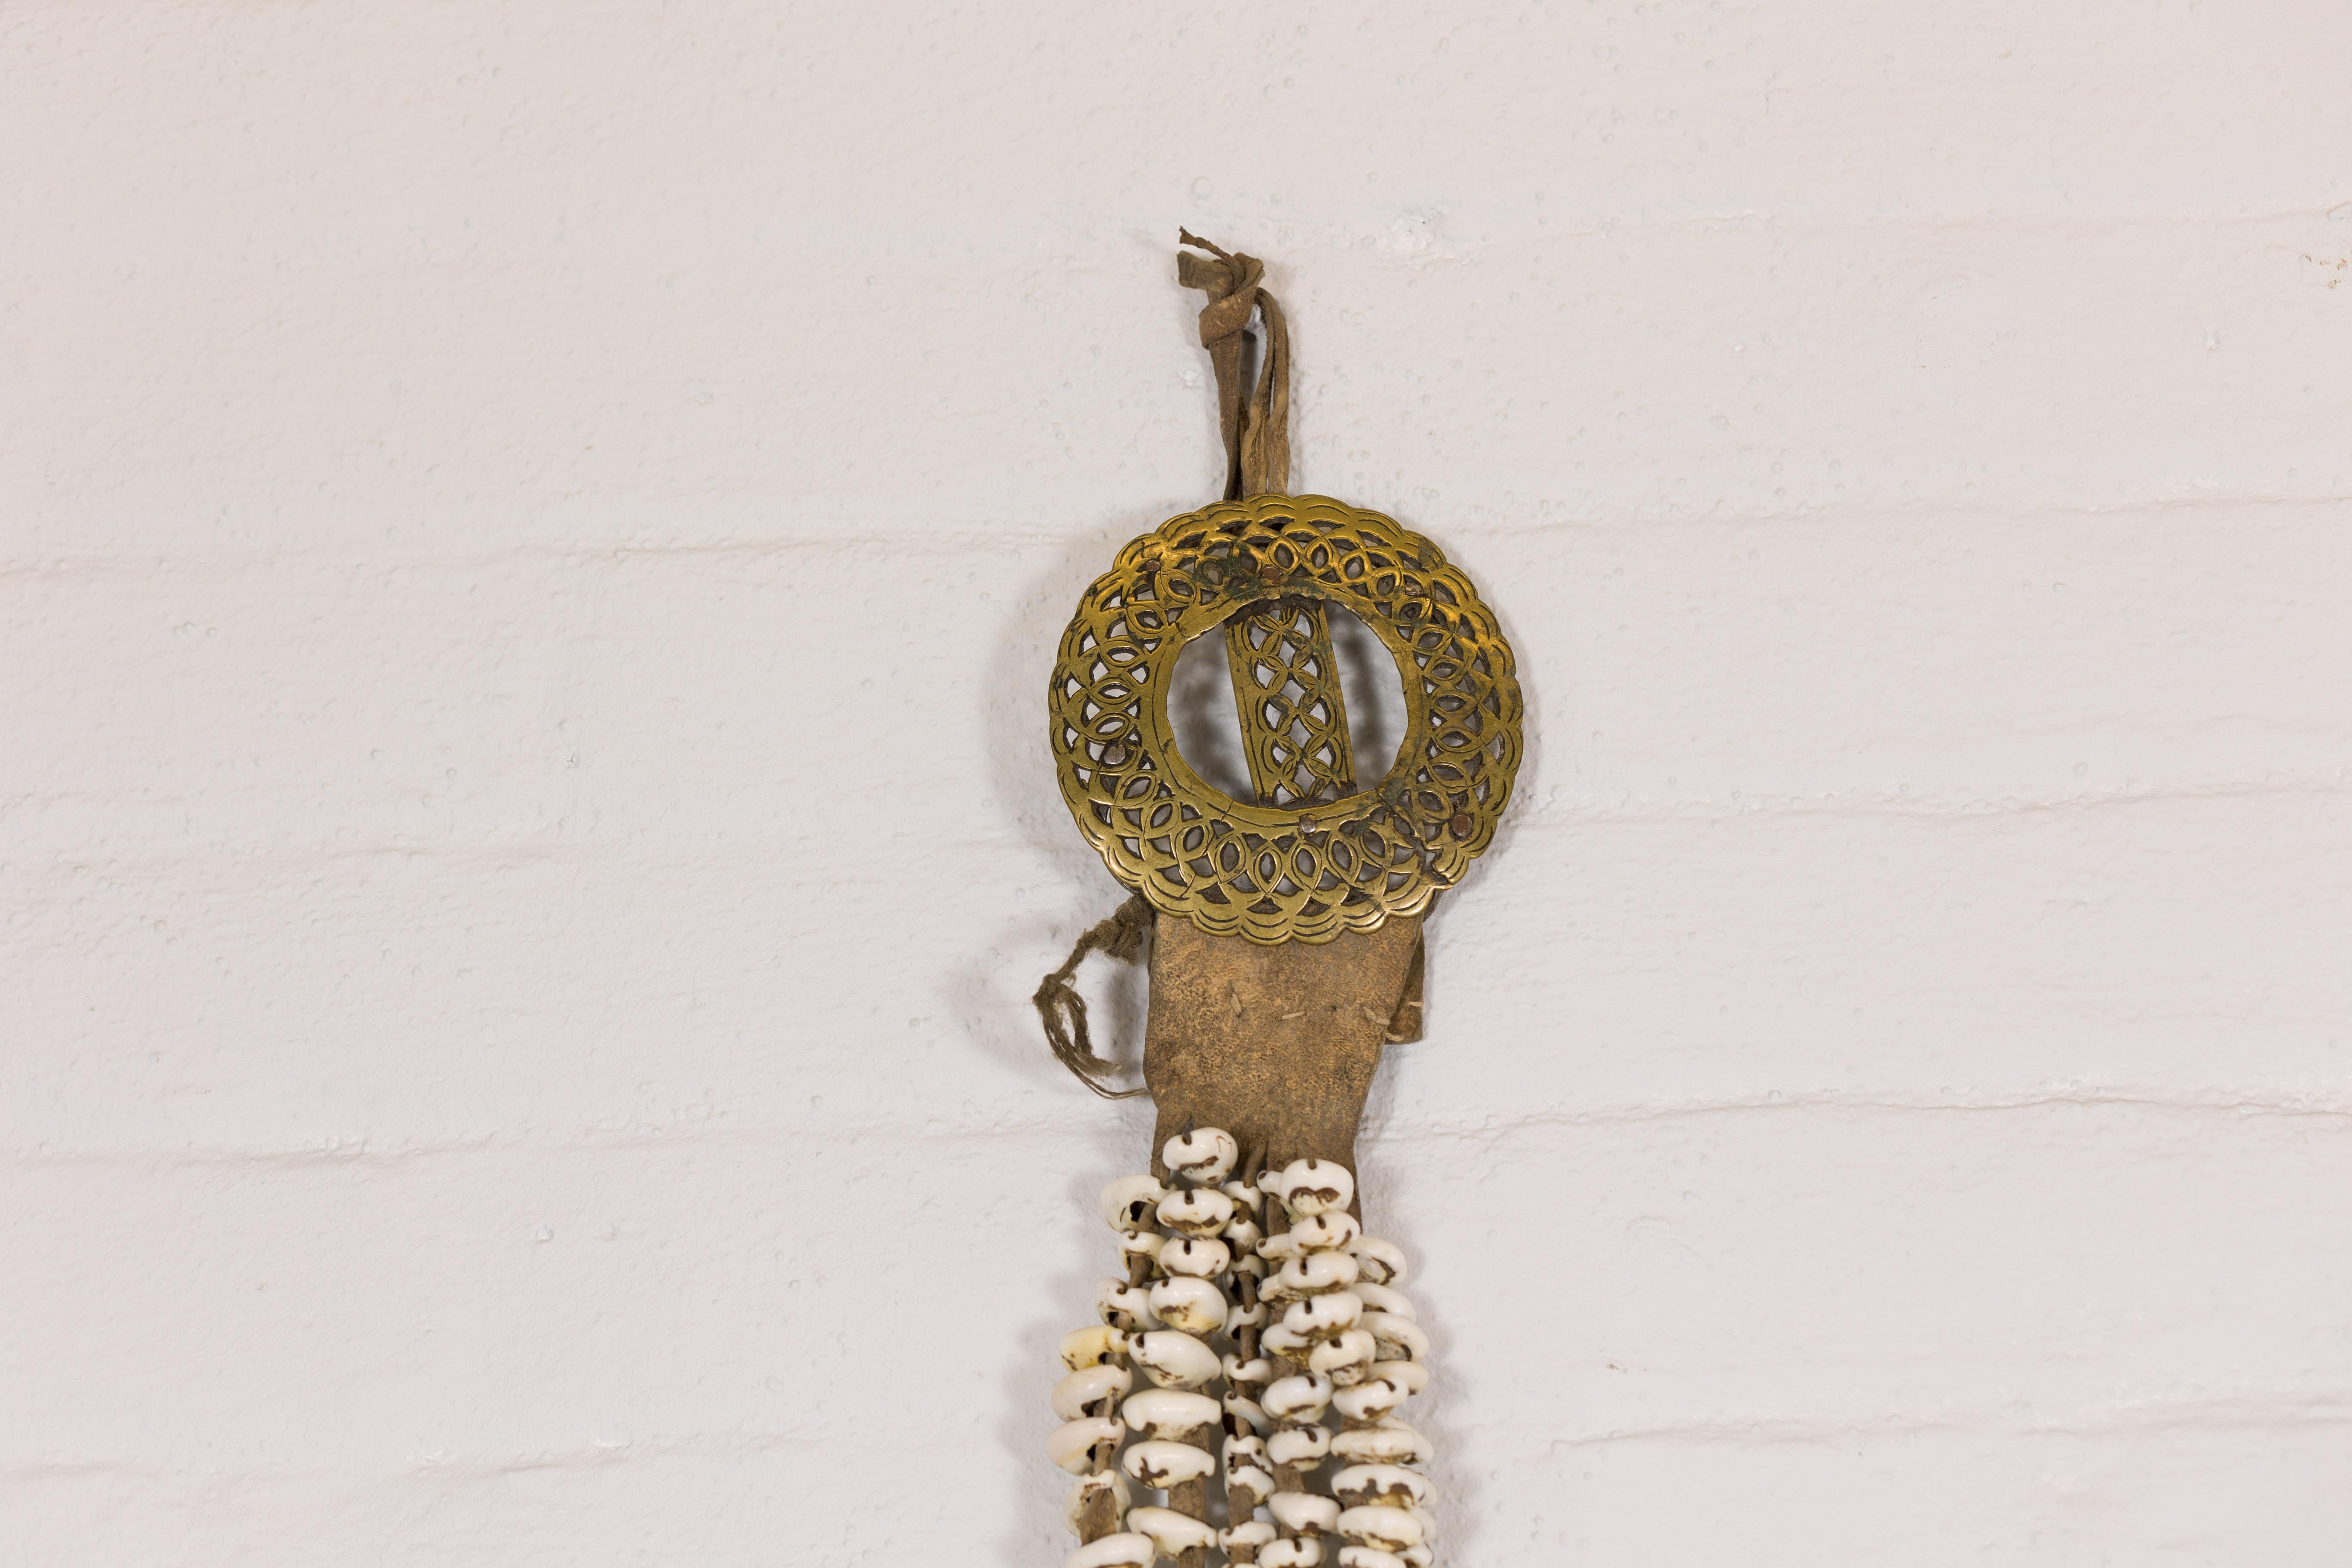 Asian Antique Body Ornament Made of Himalayan Shells Secured to a Brass Buckle